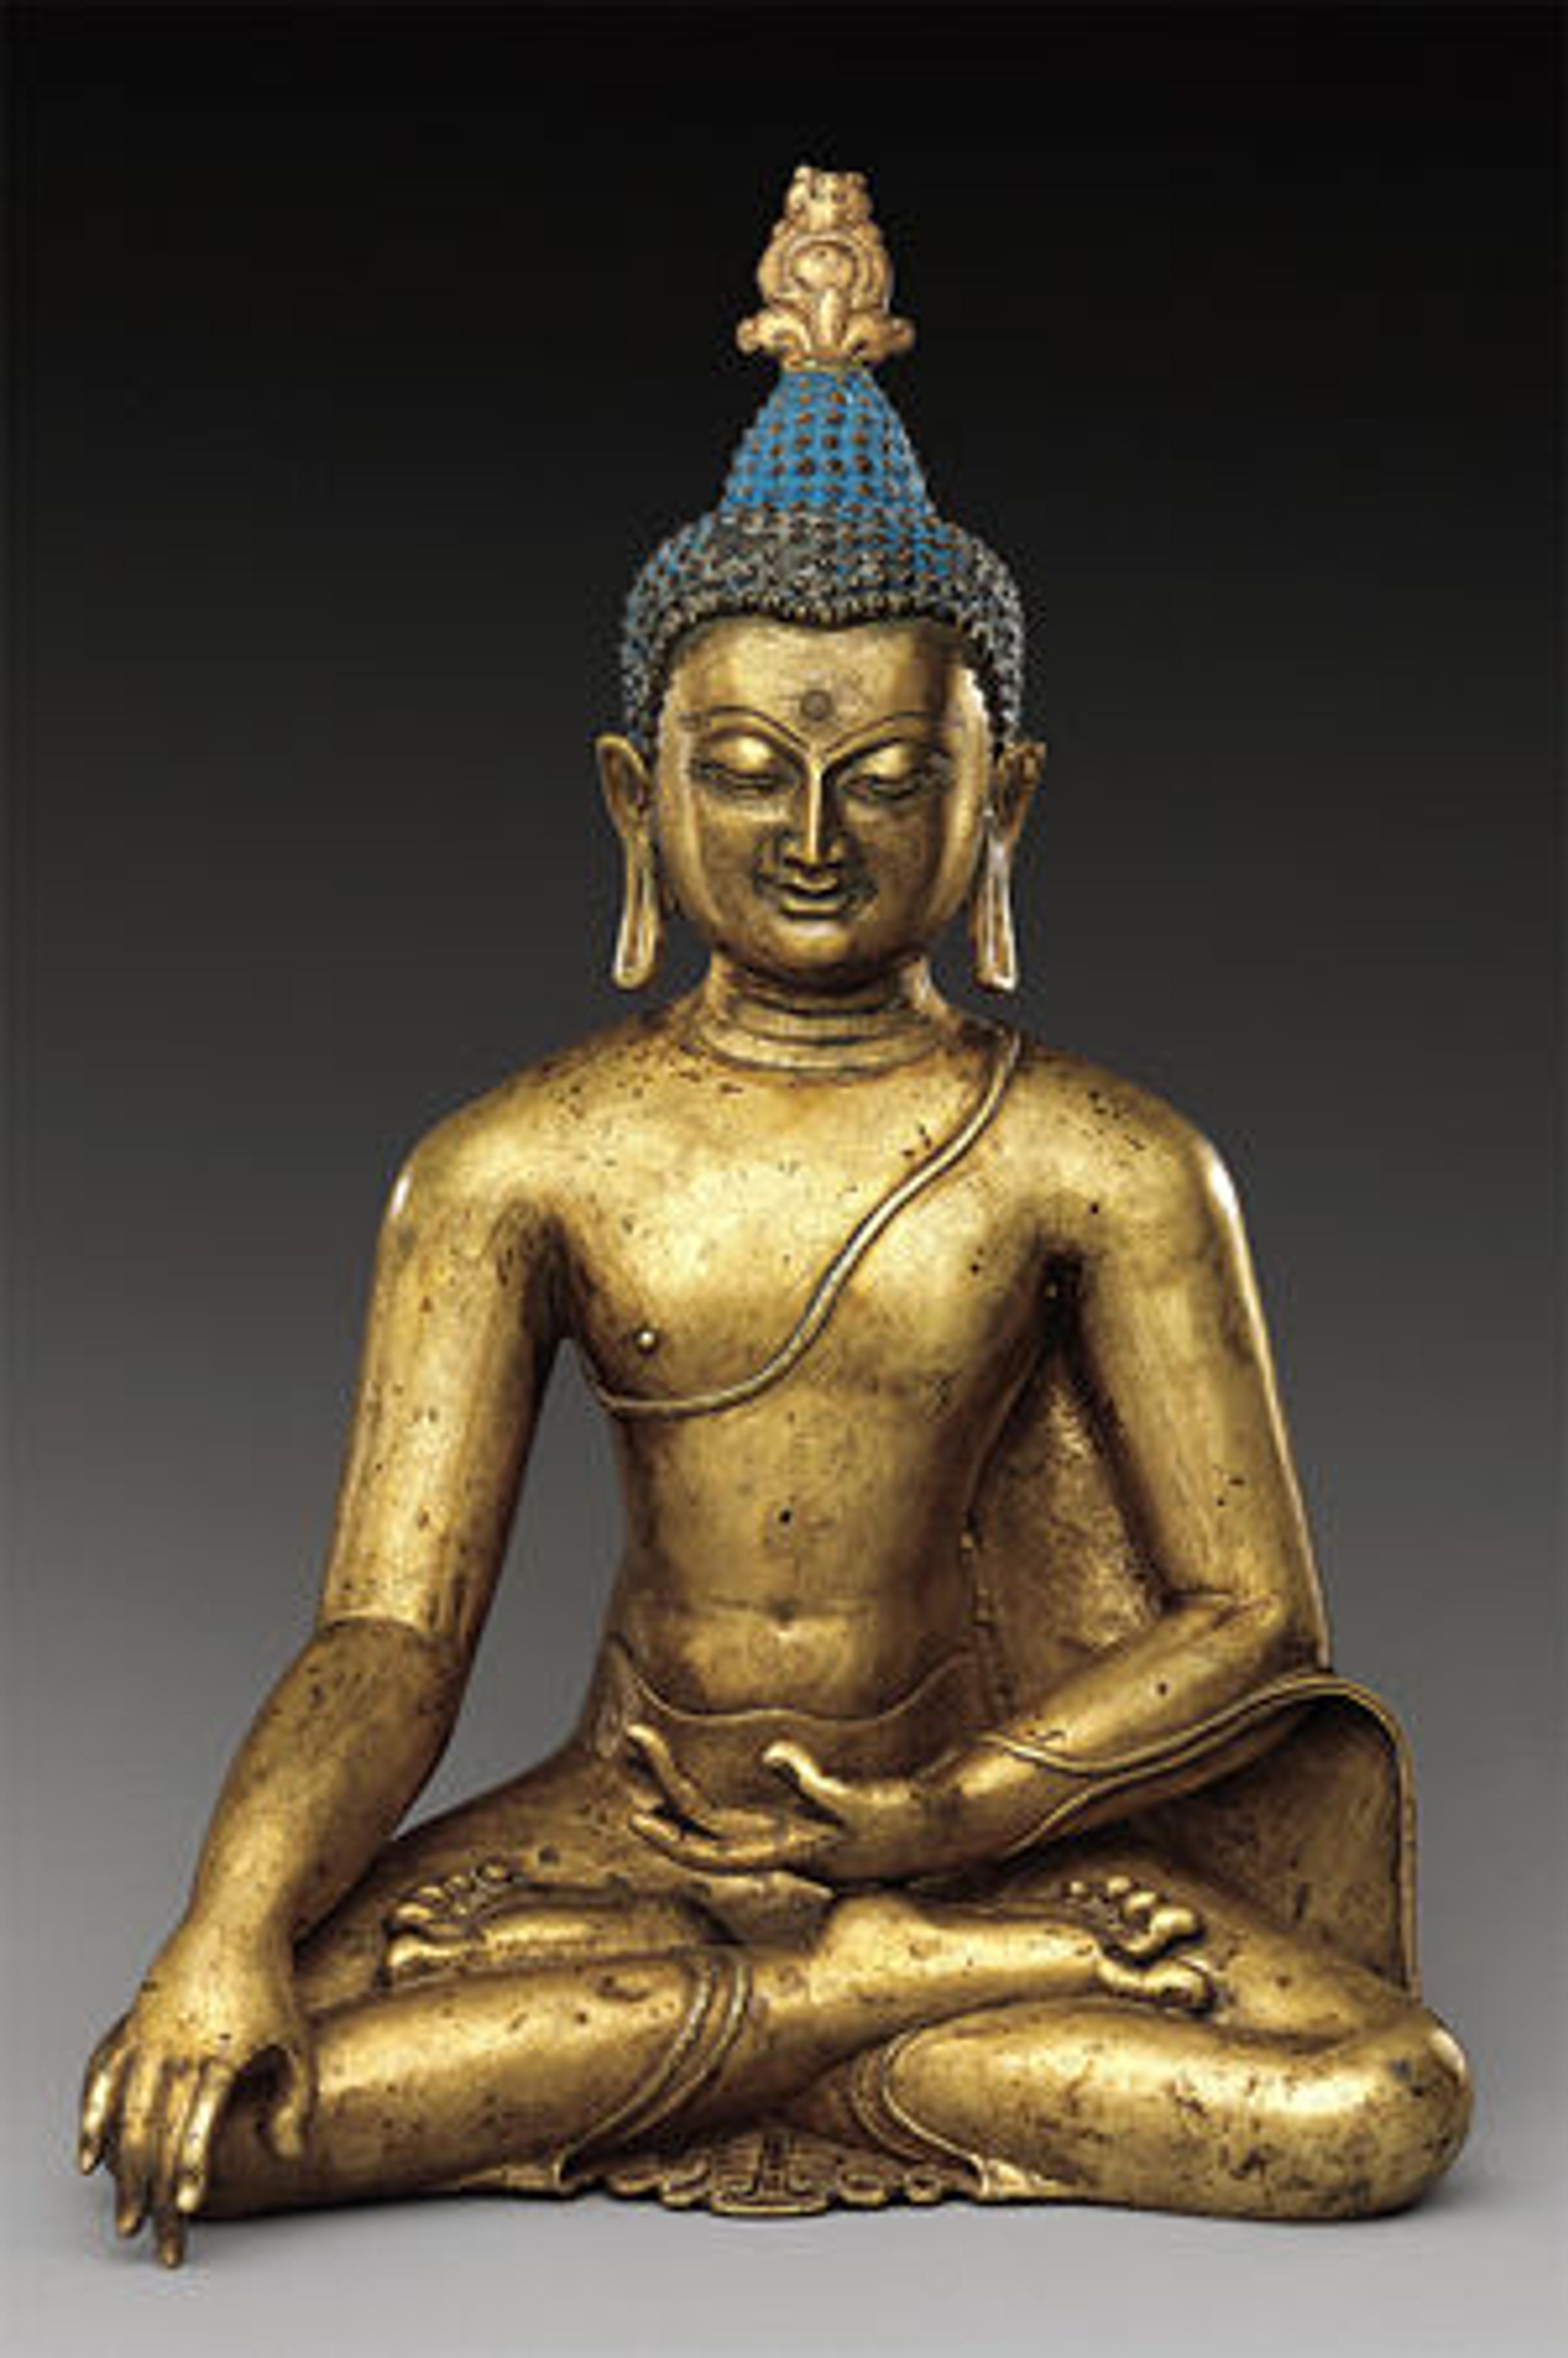 Seated Buddha Reaching Enlightenment. Central Tibet, 11th or 12th century